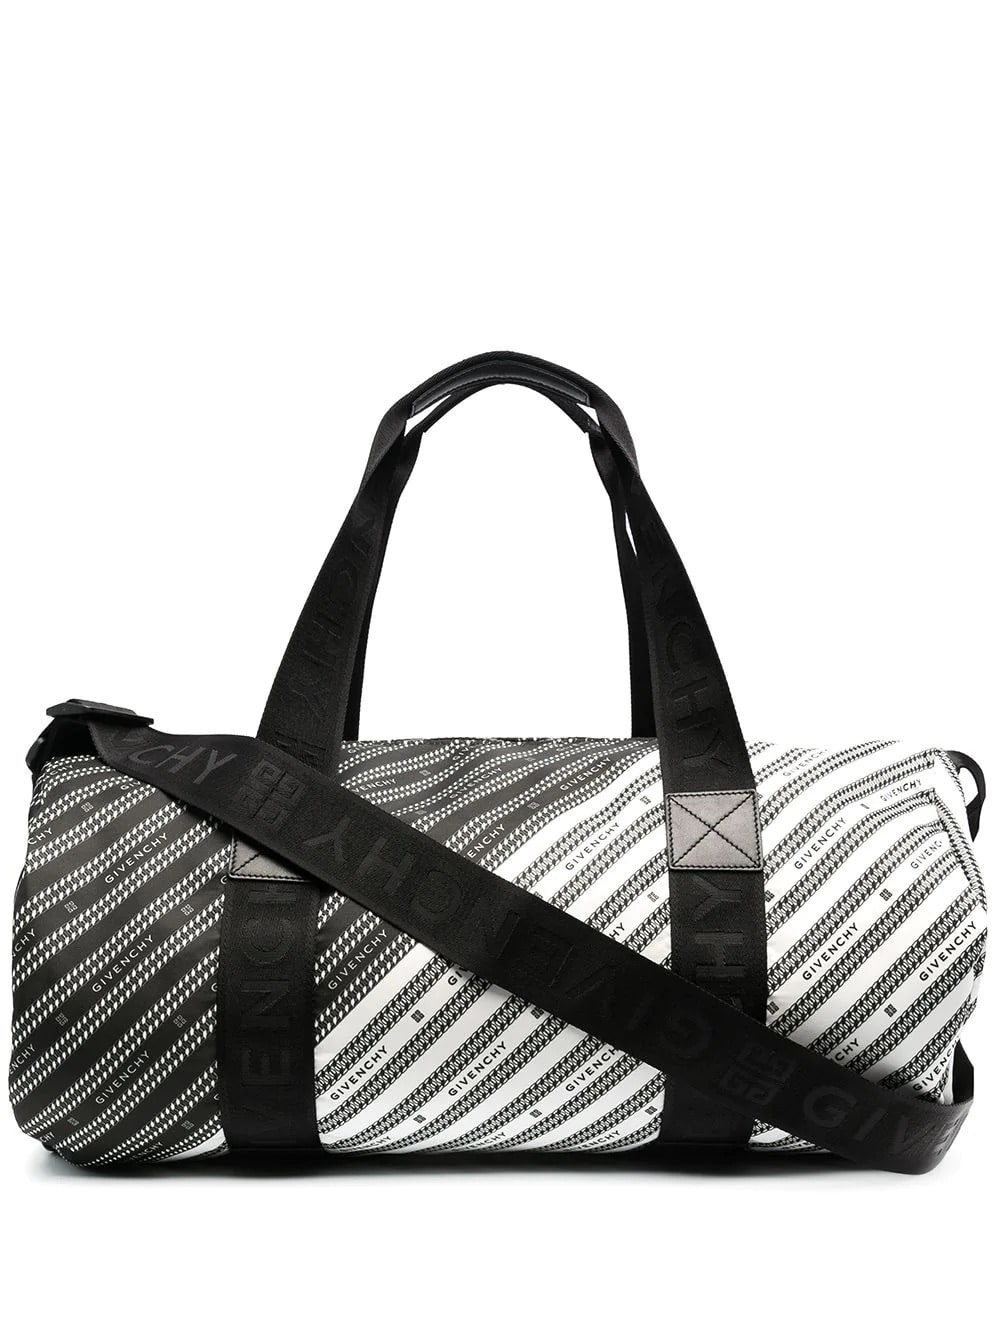 Givenchy Black And White  Light 3 Duffel Bag